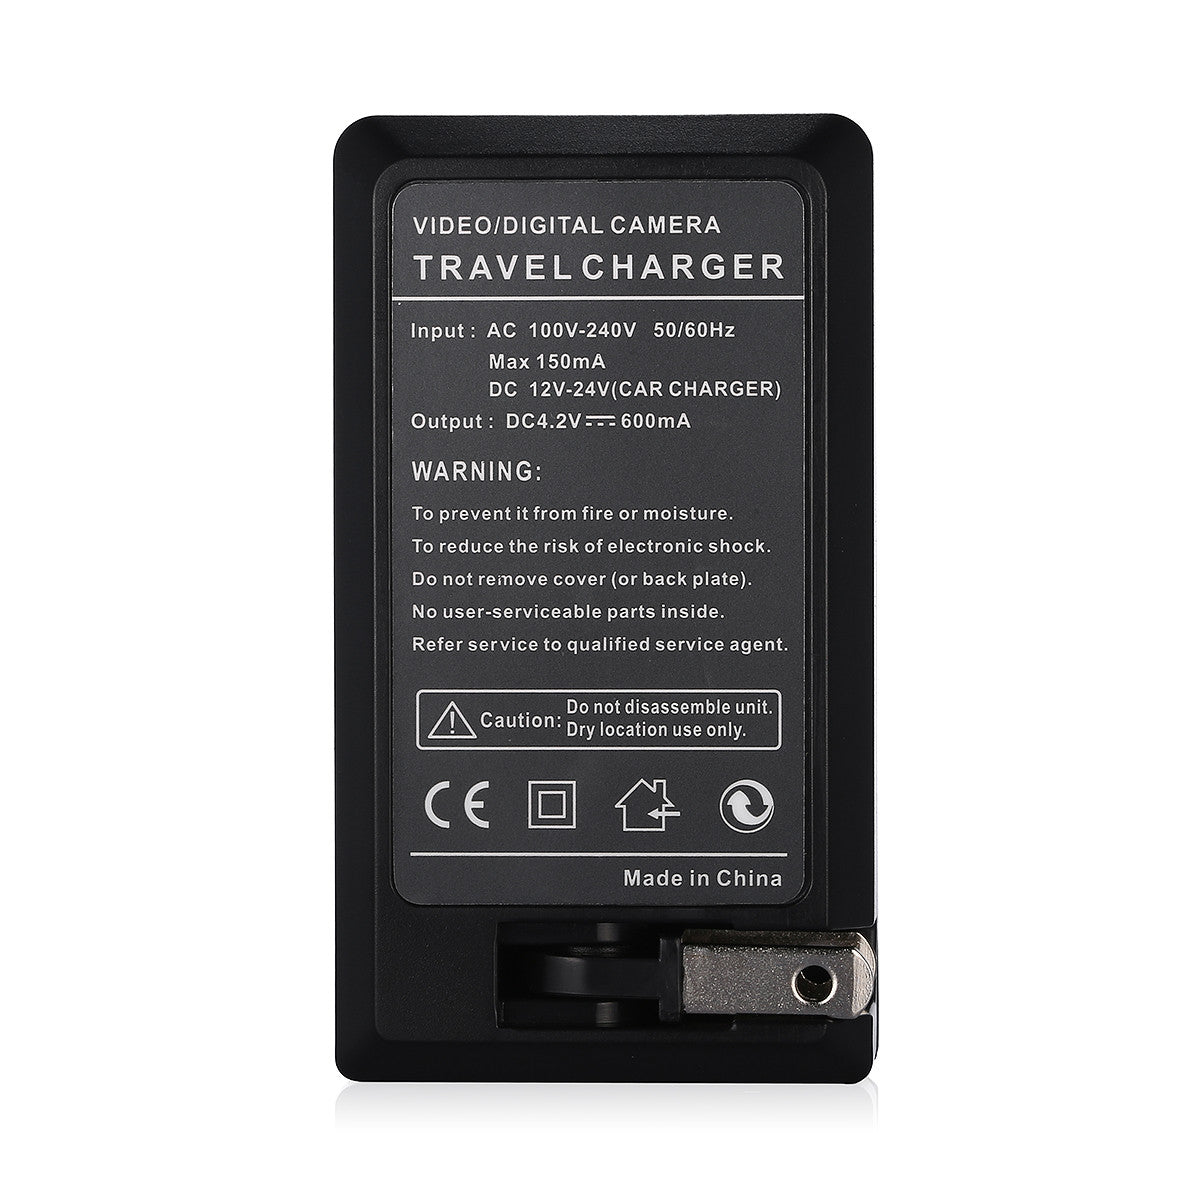 Powerextra NP-40 Battery Charger